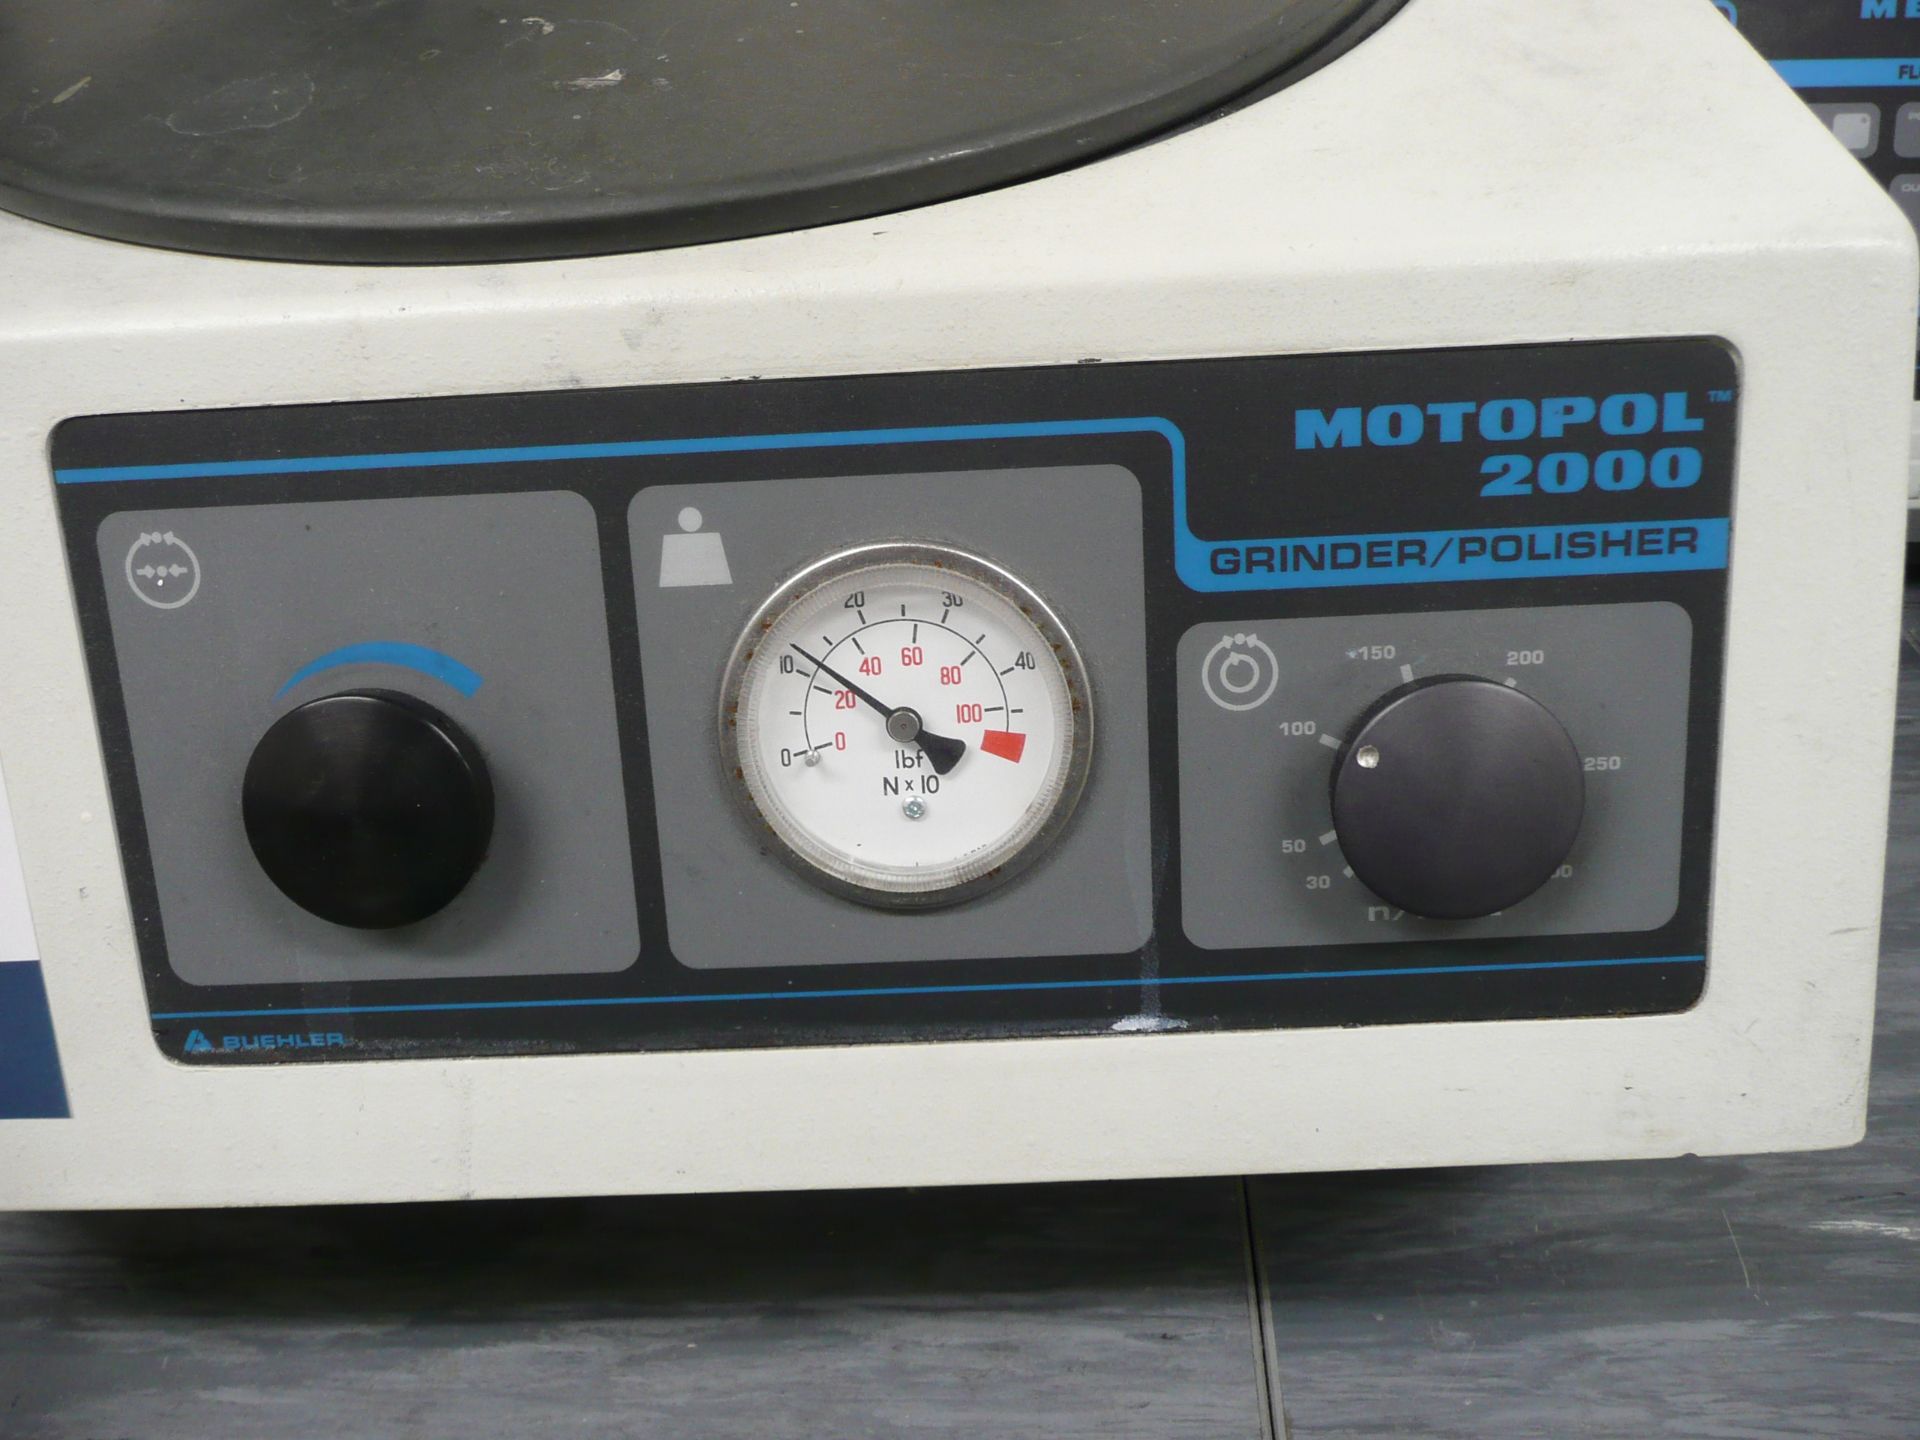 Buehler, Motopol 2000, grinder/polisher fitted with power head (95-2800) including Metlap, 2000, - Image 4 of 9